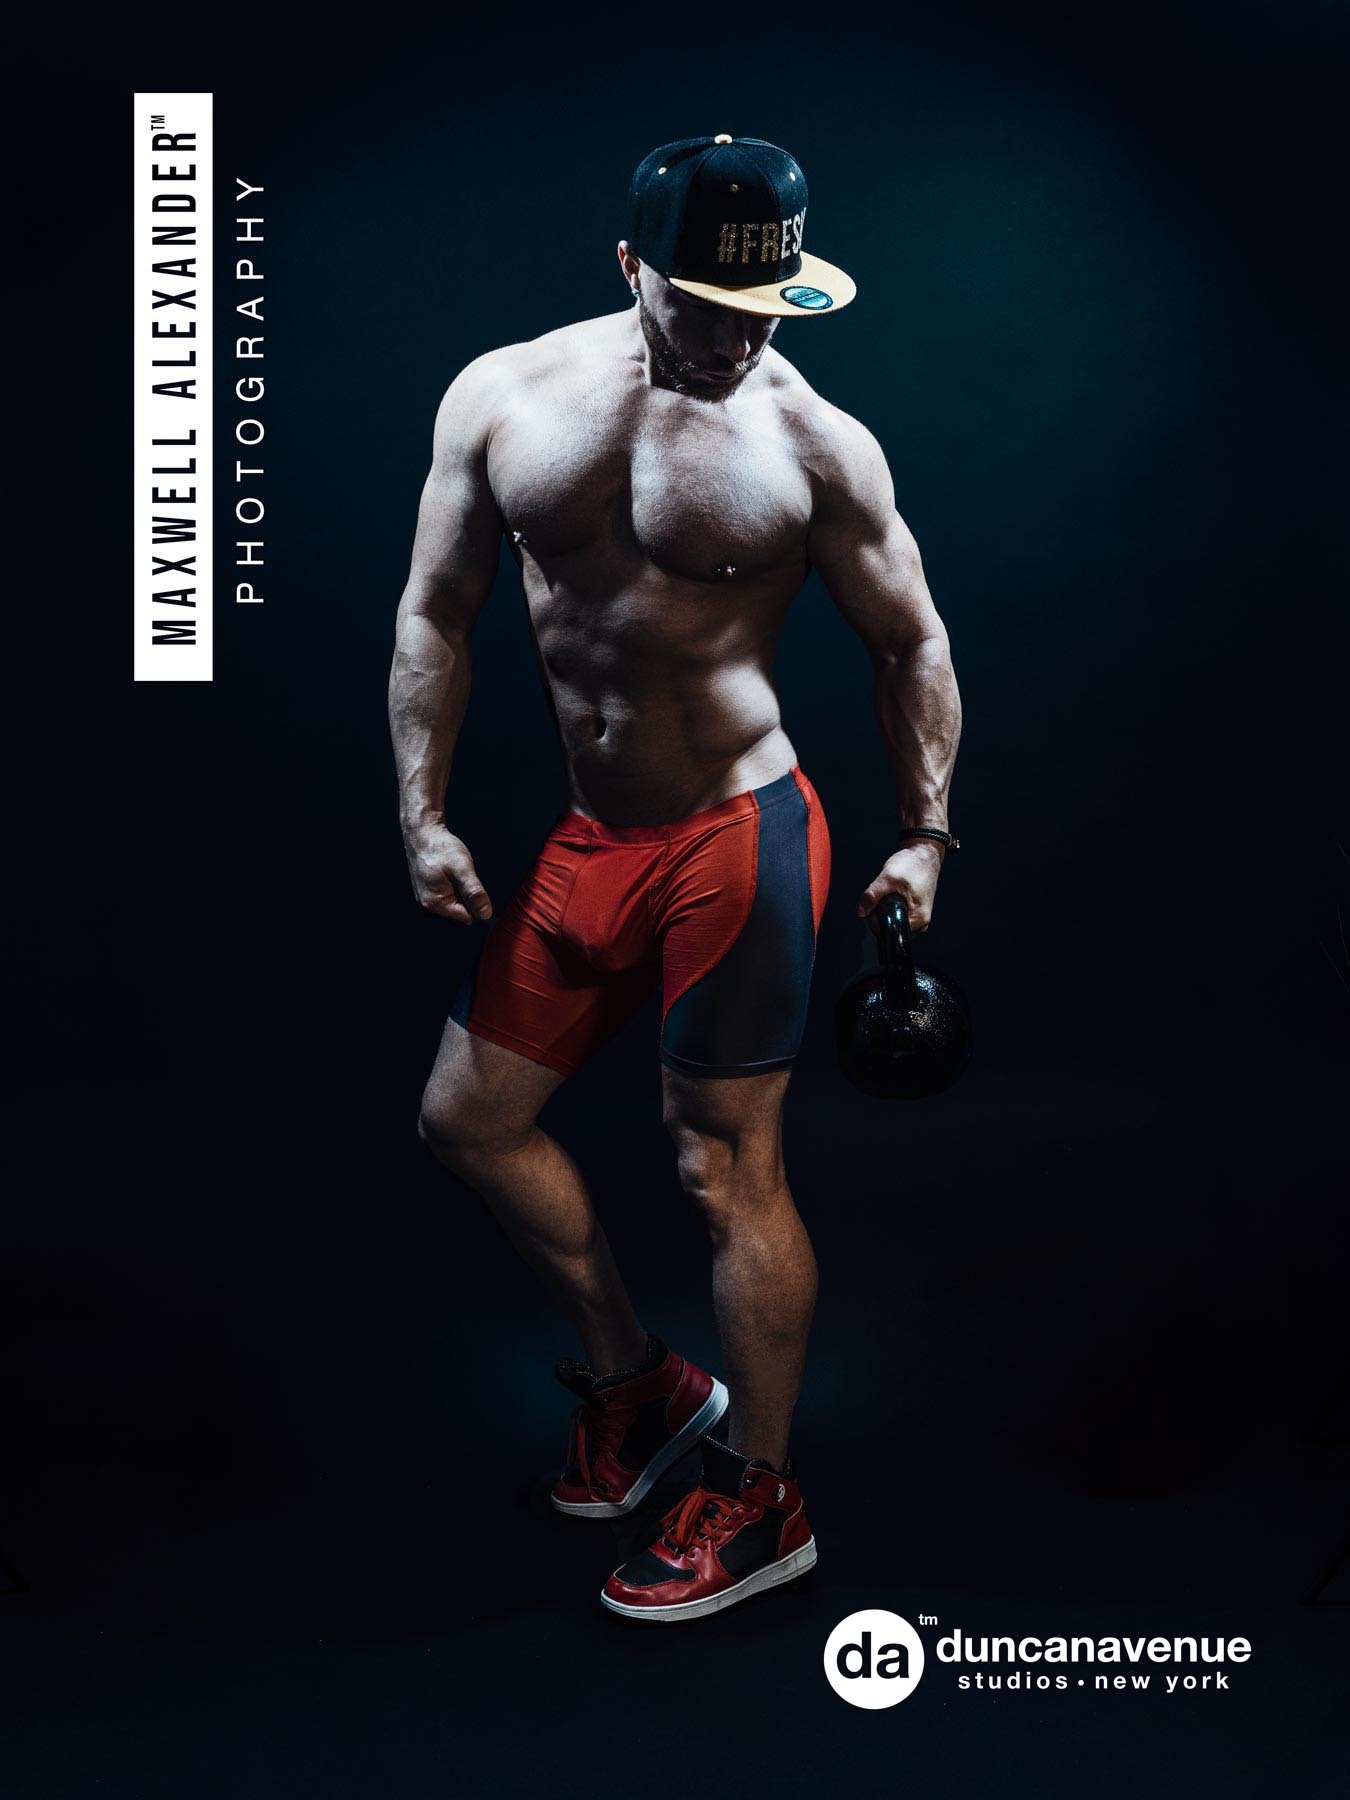 Discover the Best Men’s Fashion Accessories by HARD NEW YORK – Lifestyle, Fashion, Fitness and Bodybuilding Photography by Maxwell Alexander – Duncan Avenue Studios – New York